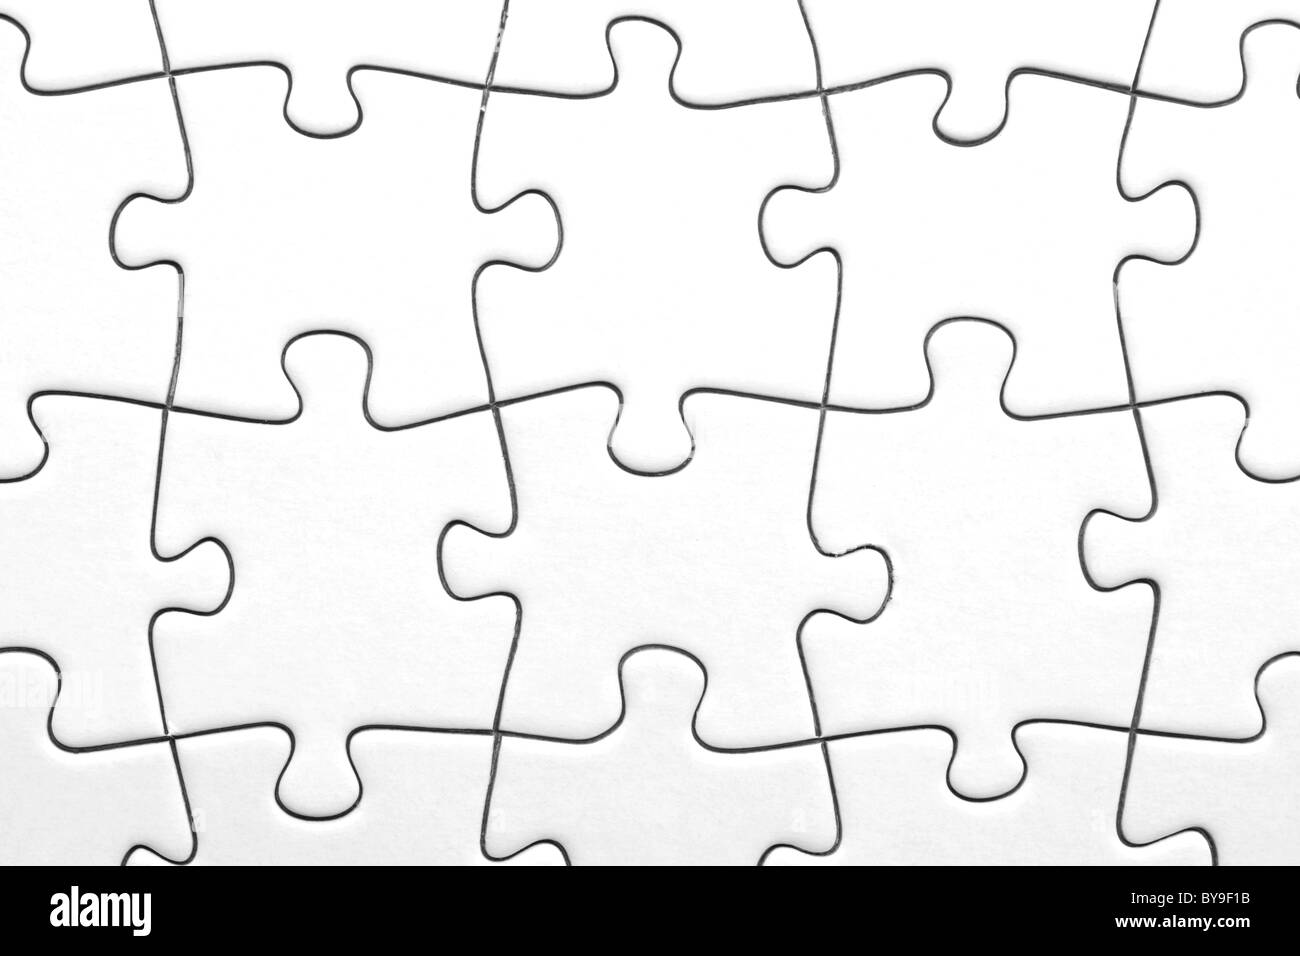 White jigsaw puzzle pieces Stock Photo